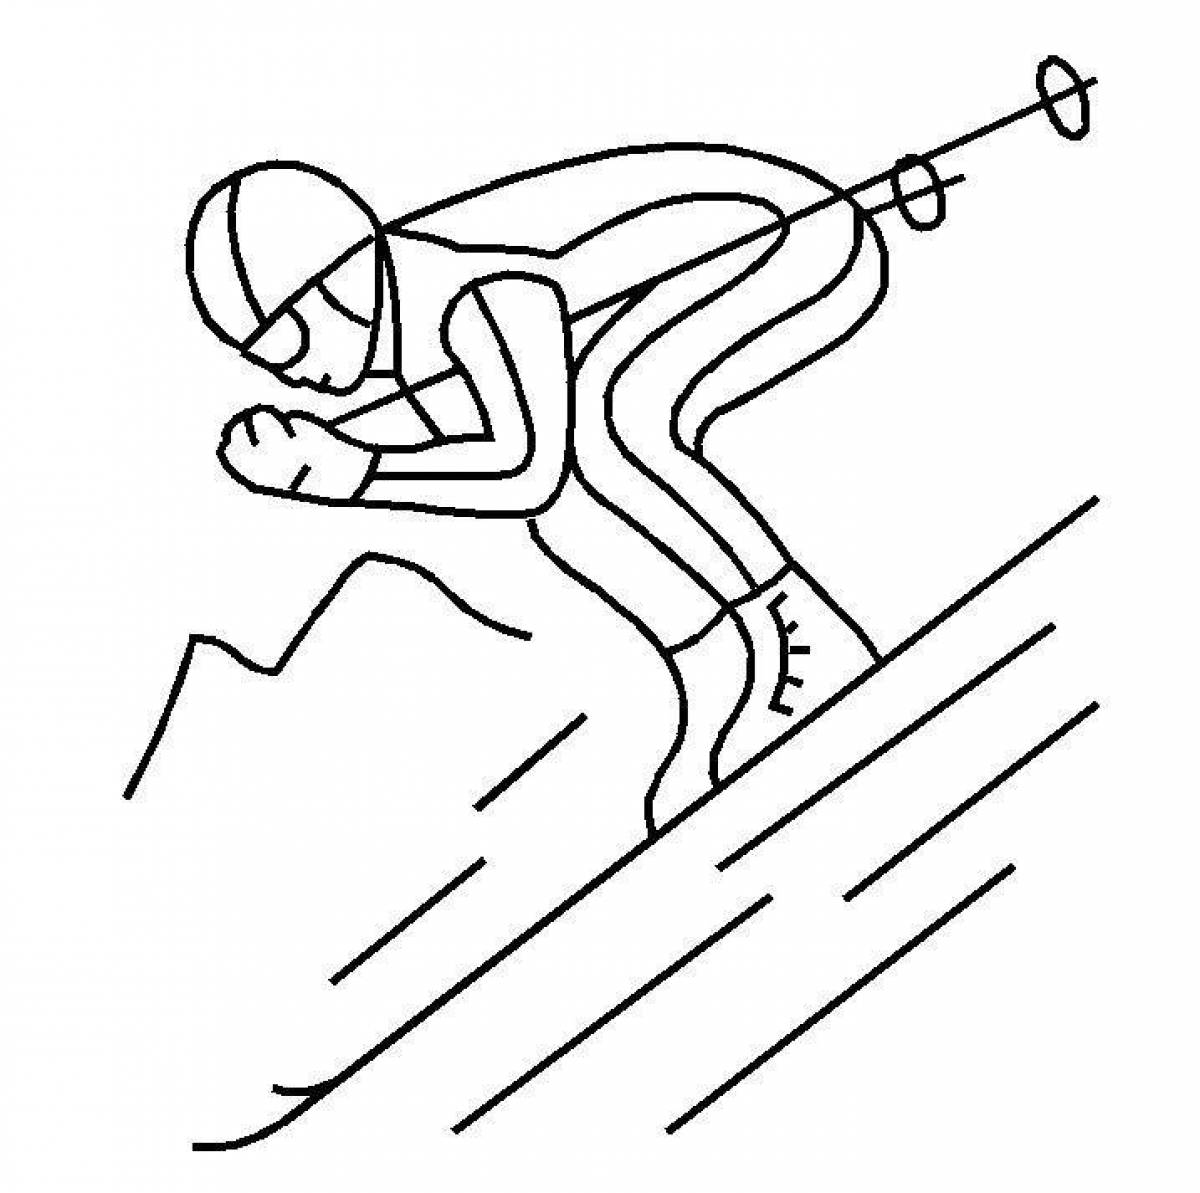 Coloring page cheerful skier